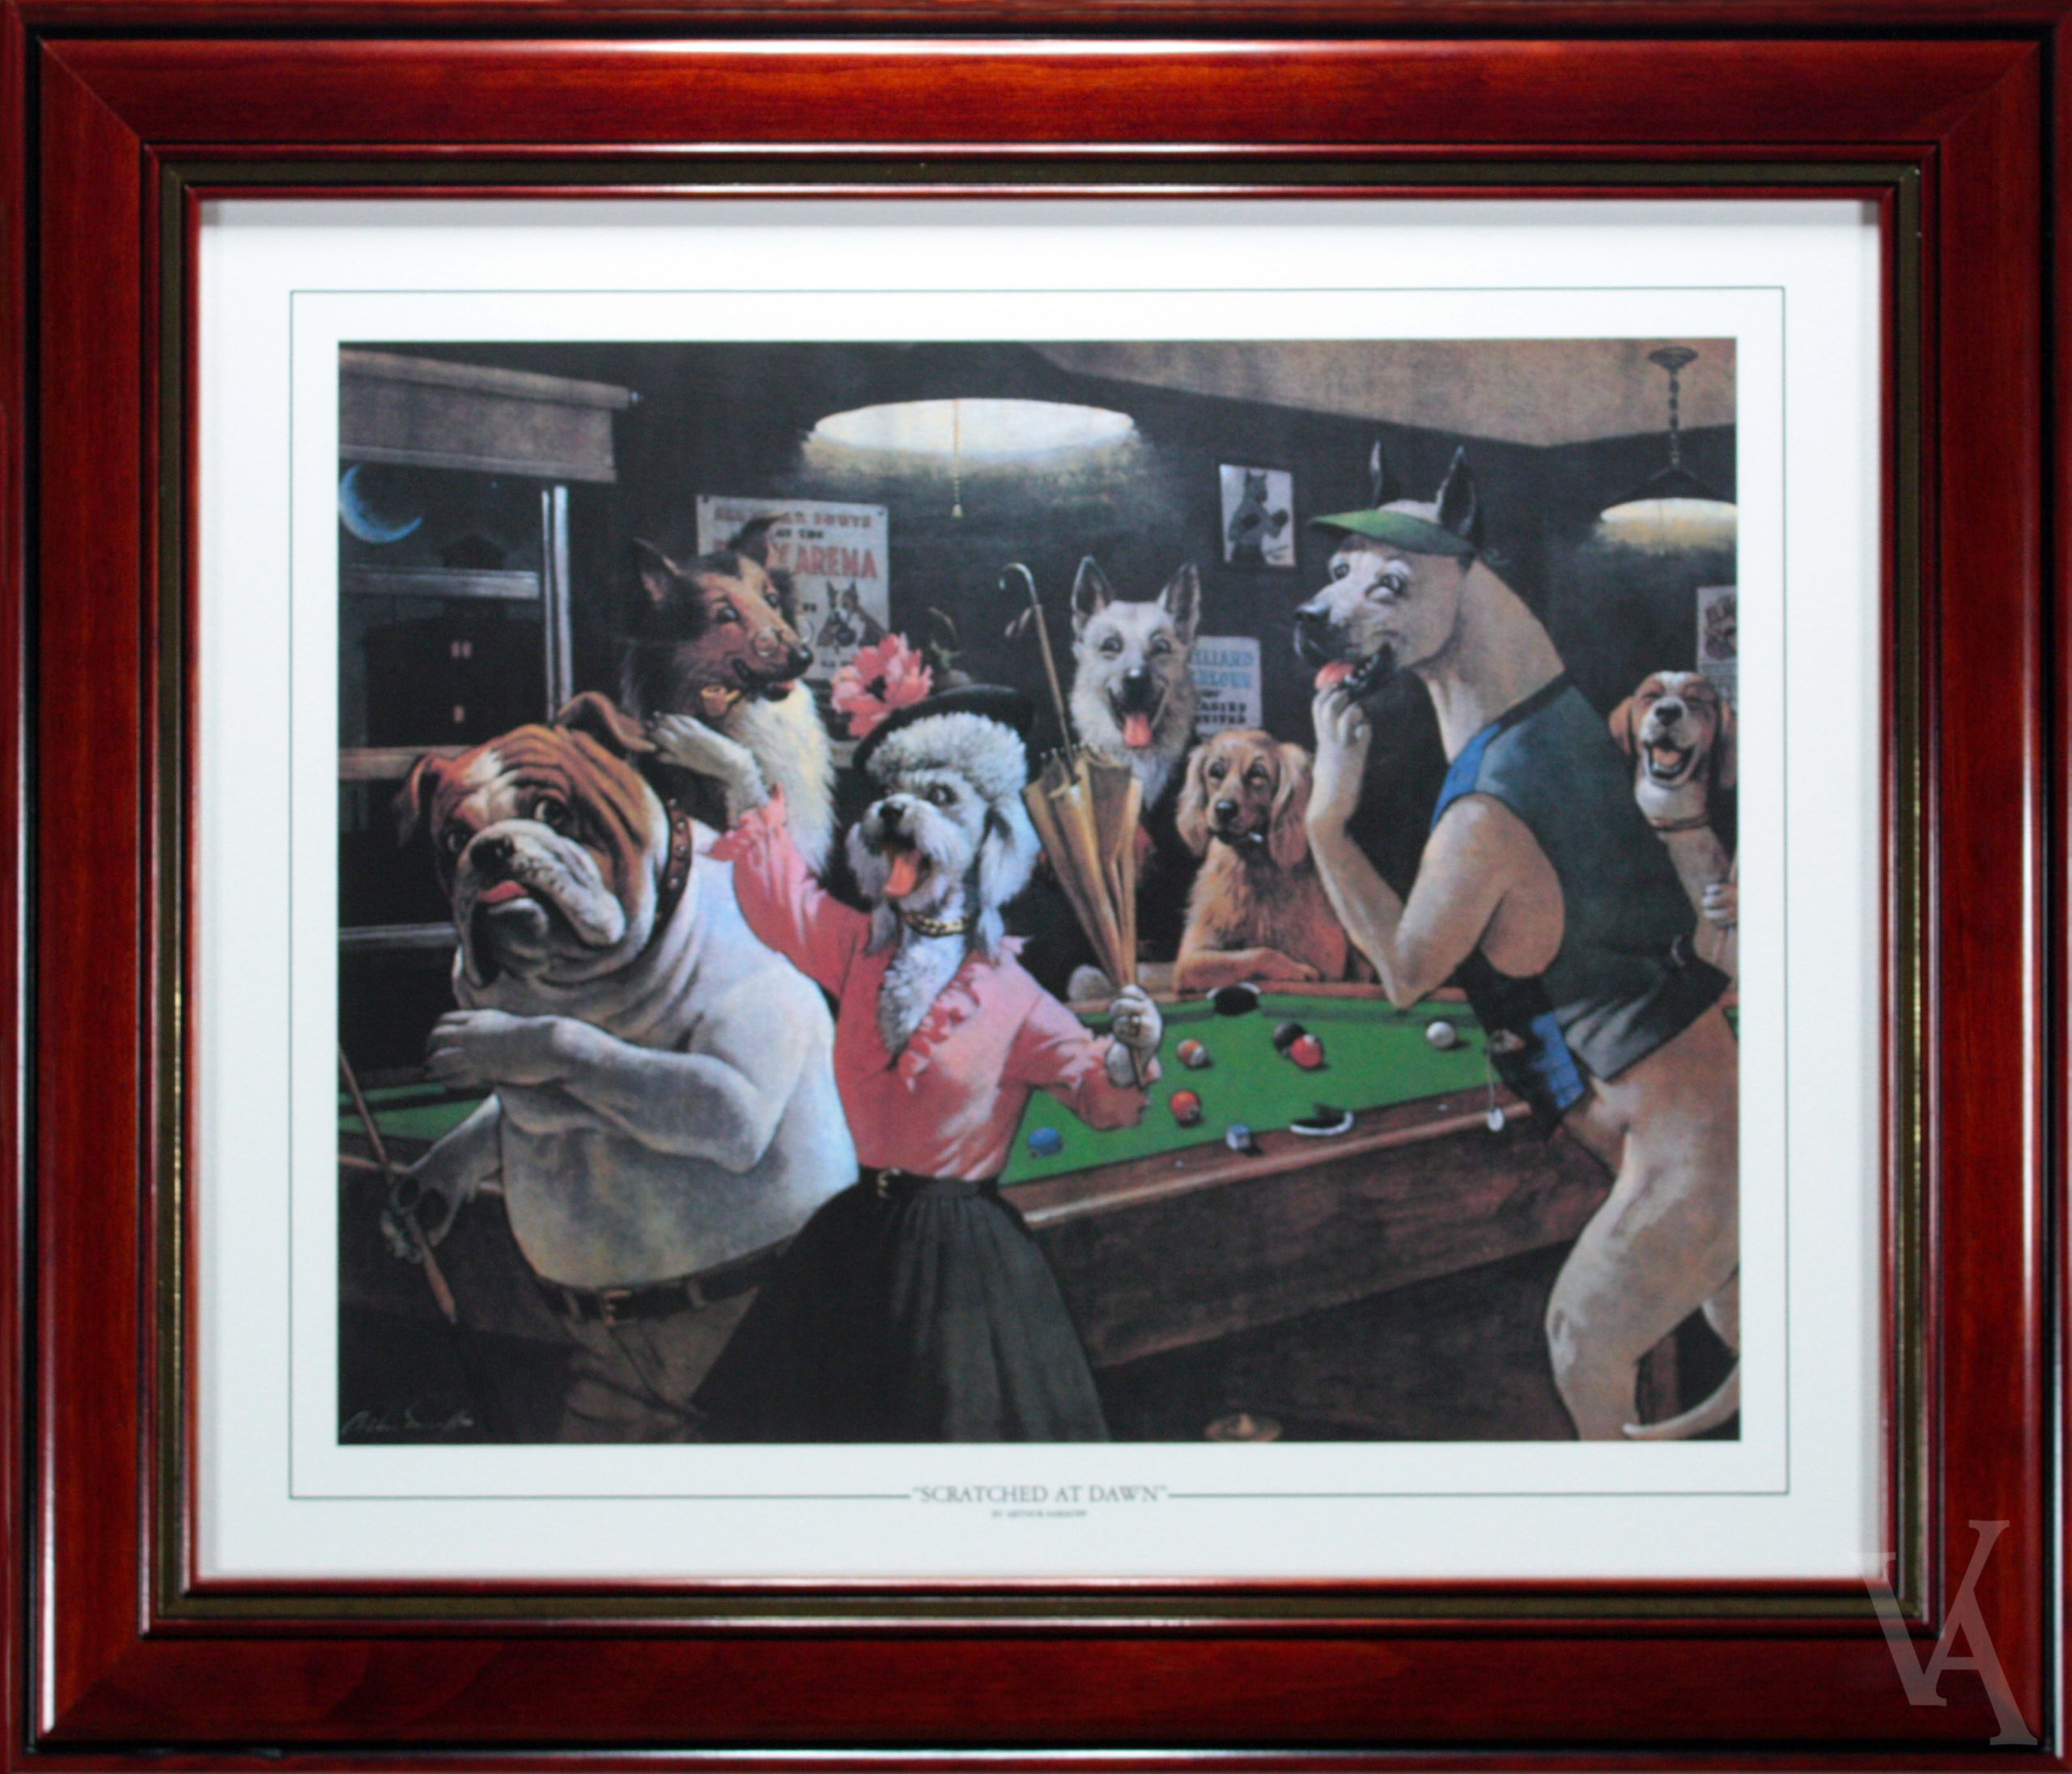 Snooker Dogs billard room framed poster print memorabilia. Home Before Dawn snooker dogs collection.